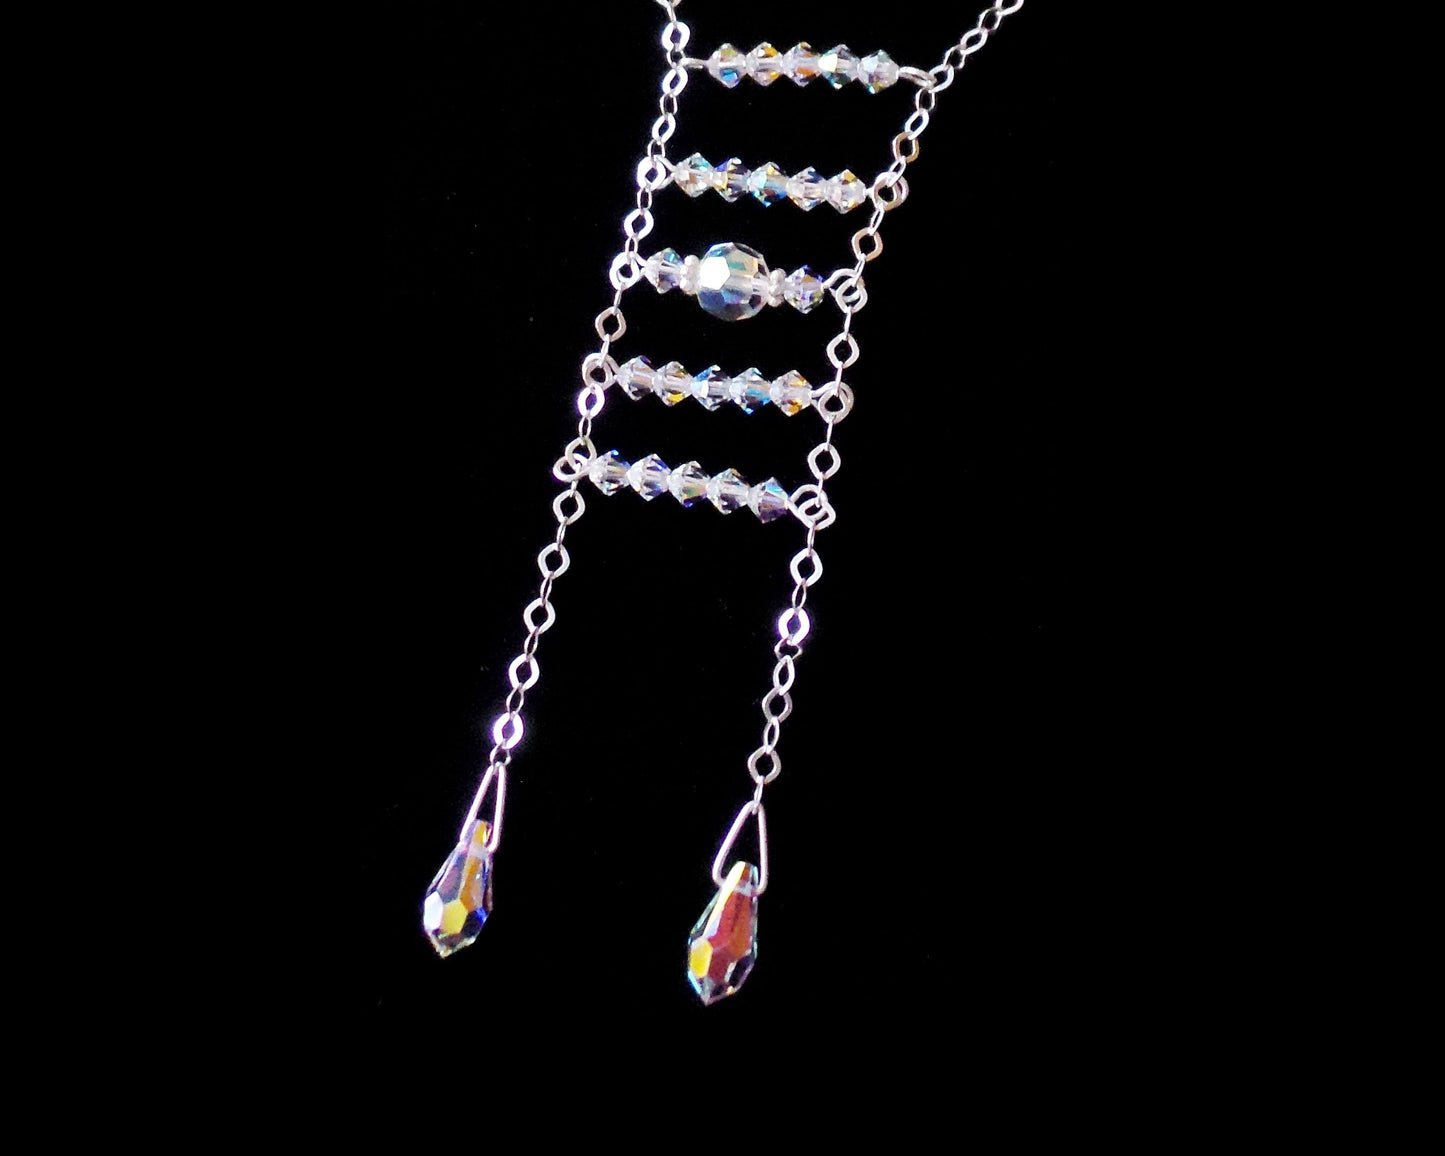 Art Deco Inspired Lariat Crystal Necklace,  A Sterling Silver, Clear AB Crystal Art Deco style Ladder Lariat with long sparkly chain and drop shaped crystals.